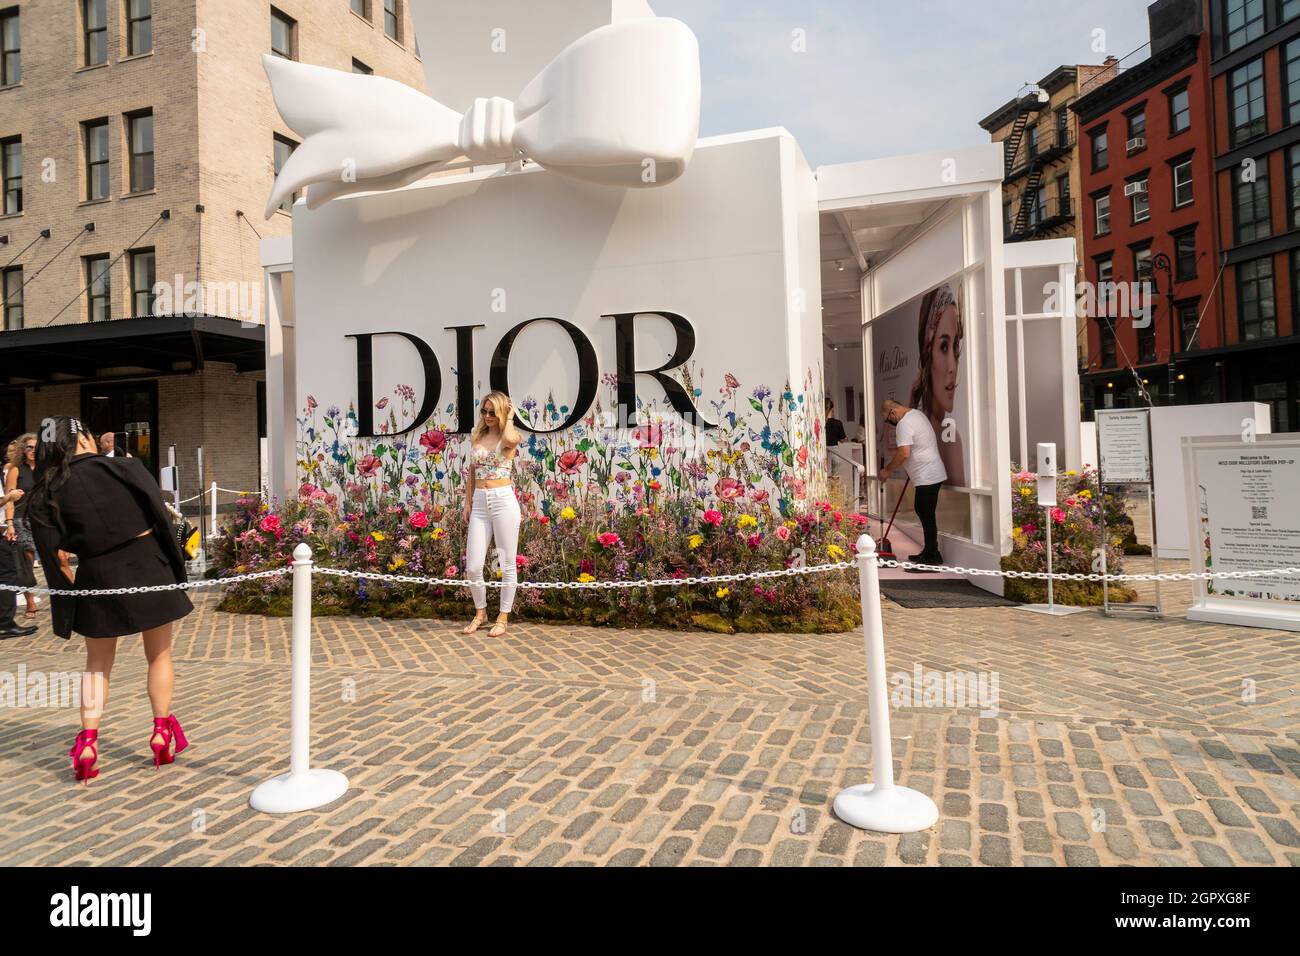 The fashionable flock to Gansevoort Plaza in the Meatpacking District in New York on Tuesday, September 14, 2021 for DiorÕs retail activation for their Miss Dior Eau de Parfum. The pop-up features beauty stations, lattes and instagrammable floral displays by the renowned florist Lewis Miller.(© Richard B. Levine) Stock Photo